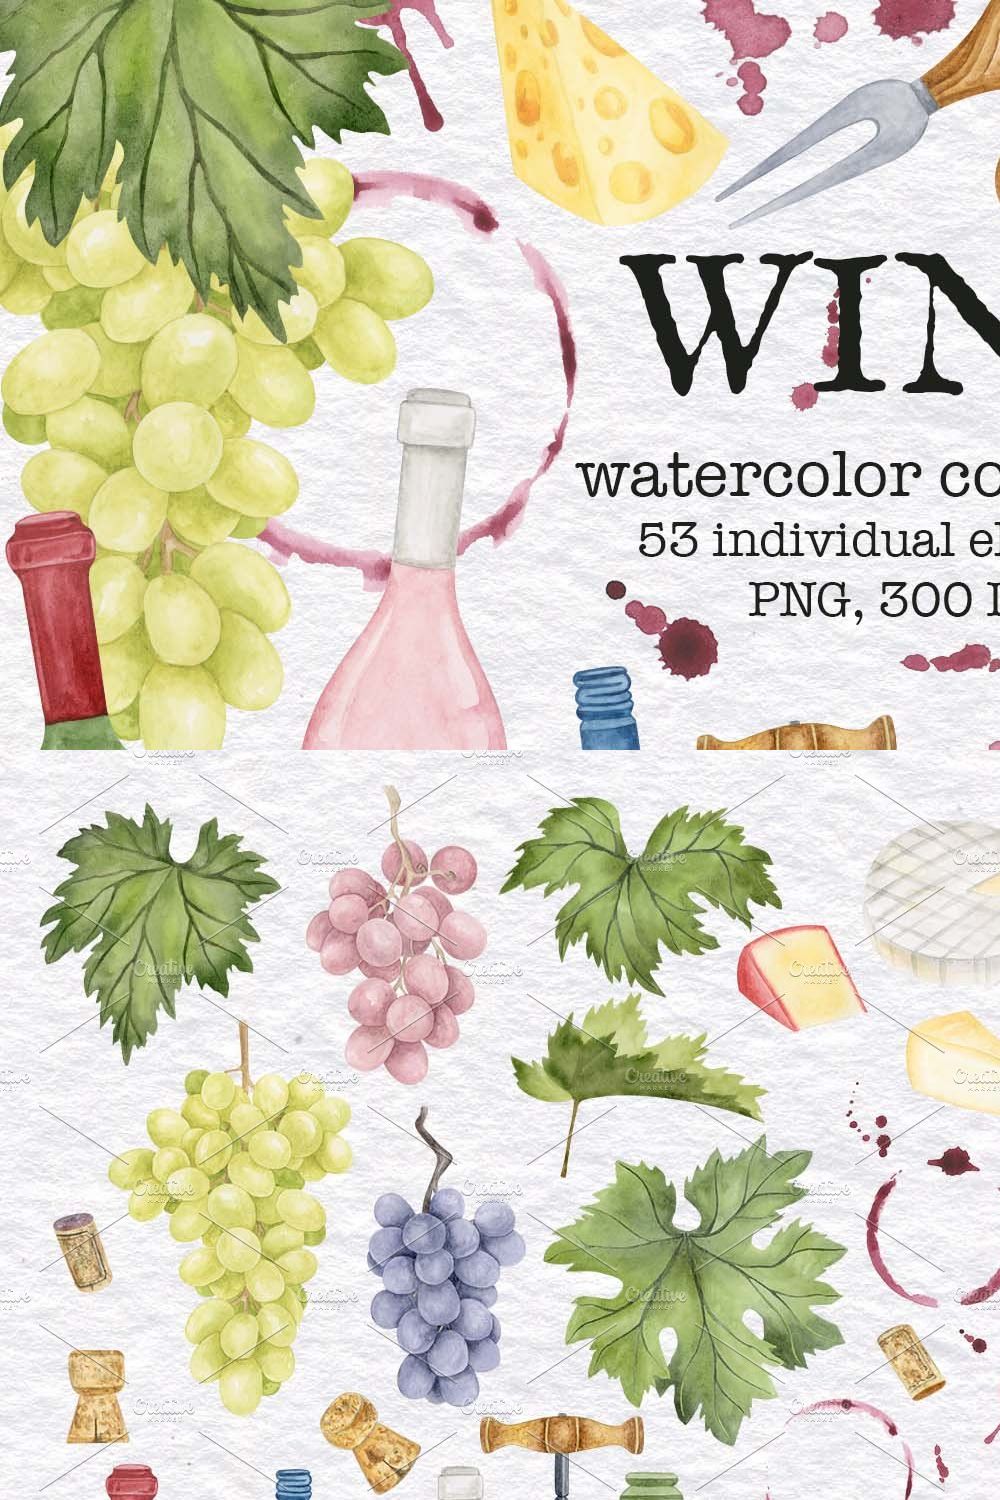 Watercolor Wine and Cheese set pinterest preview image.